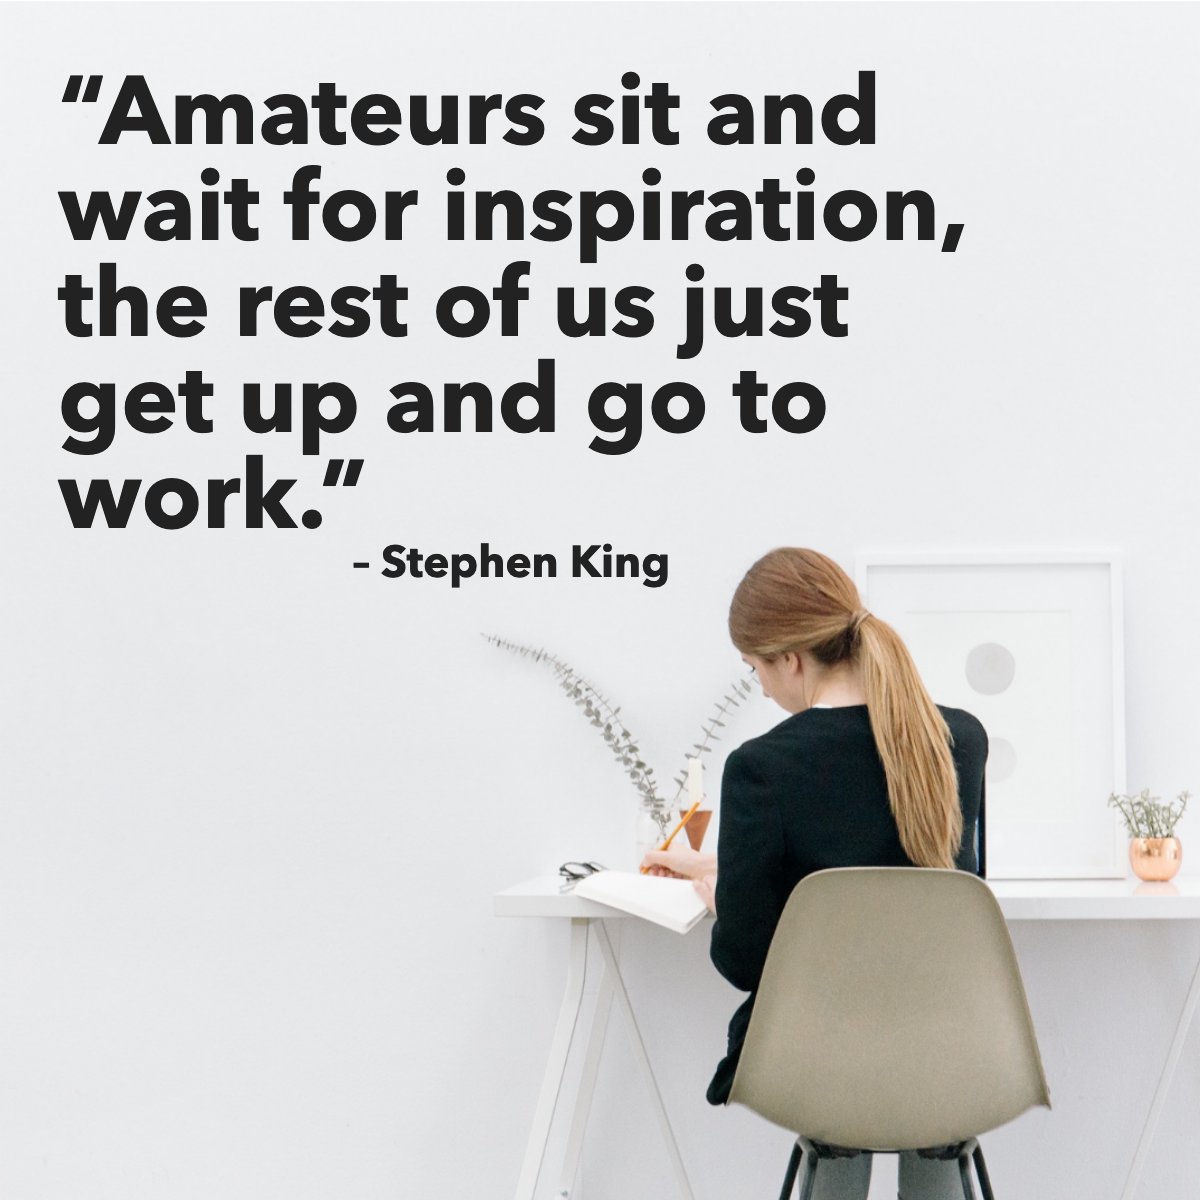 What makes you feel inspired? ✍👨‍💻

#workinspirations #working #inspirationalquote